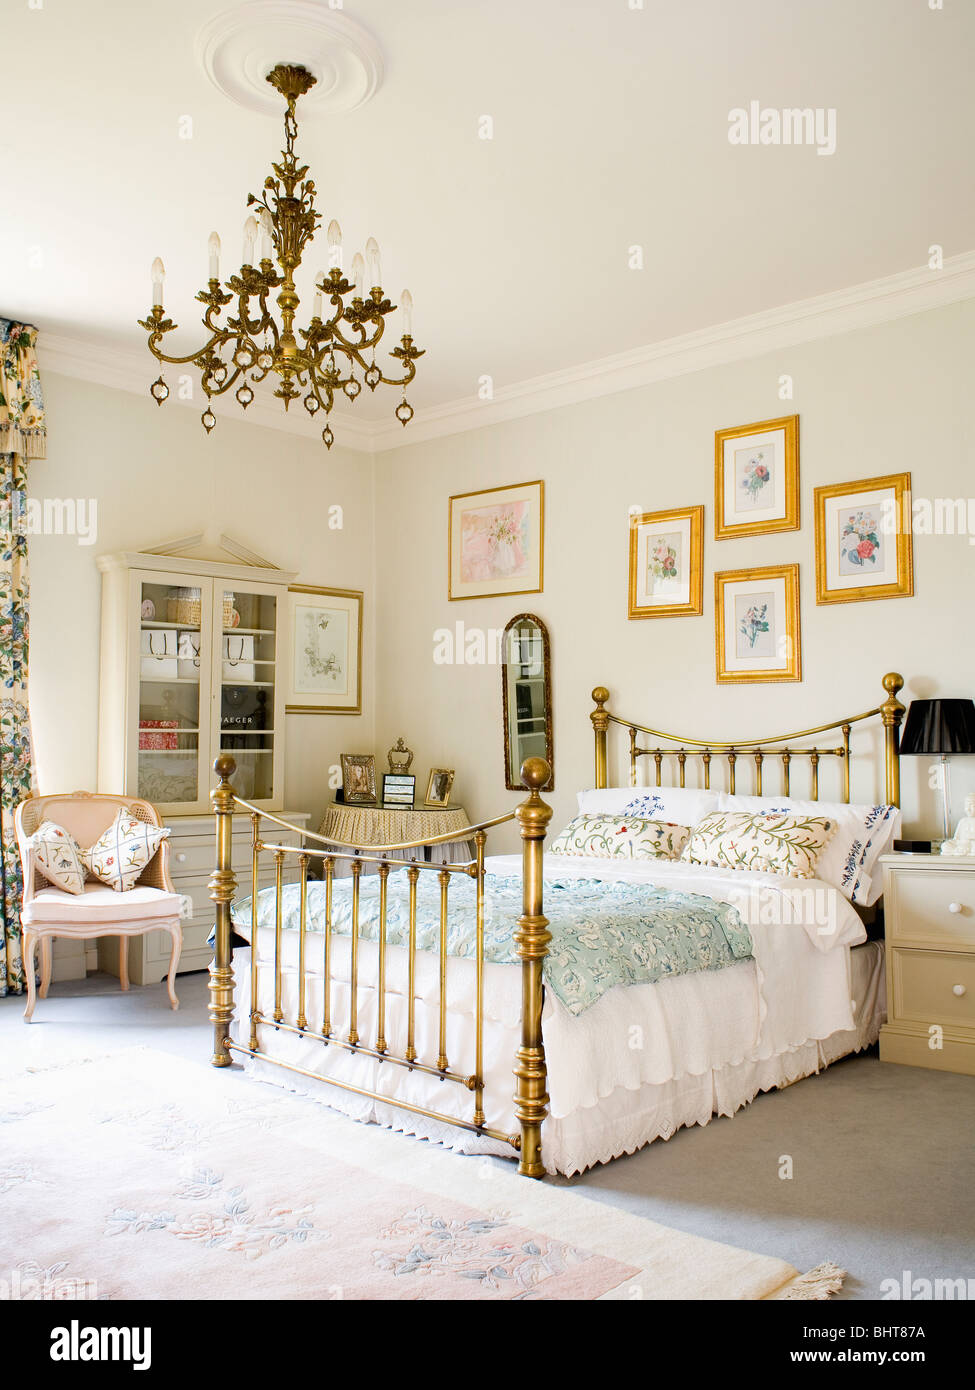 Brass chandelier and antique brass bed in traditional bedroom